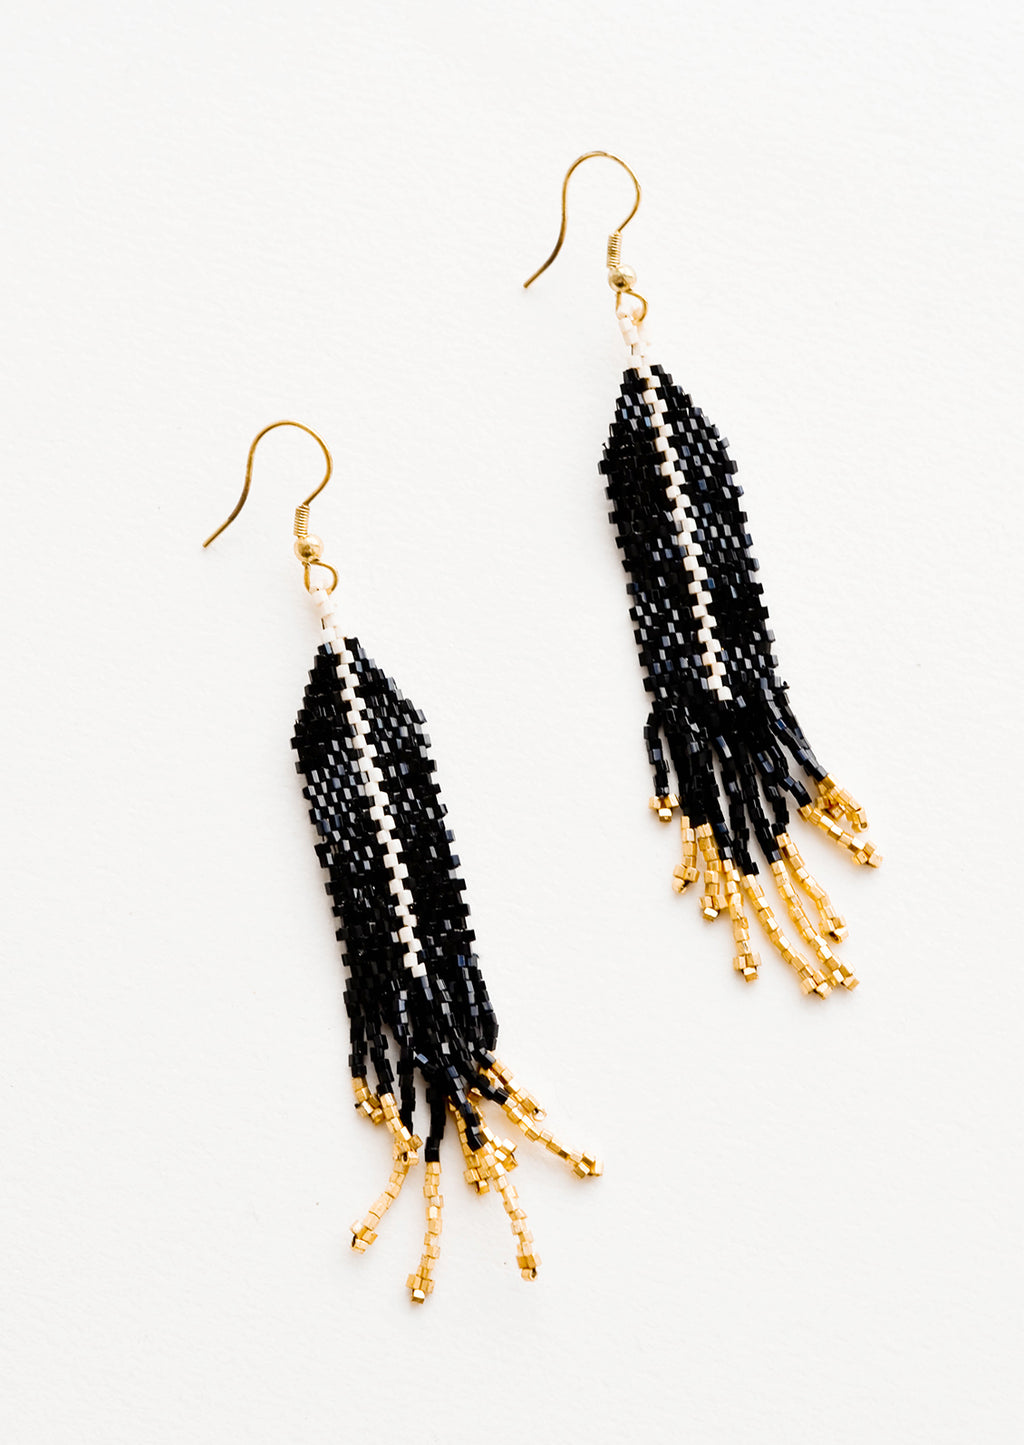 Black: Dangling beaded earrings with black beads accented with gold bead stripe and gold bead fringe.